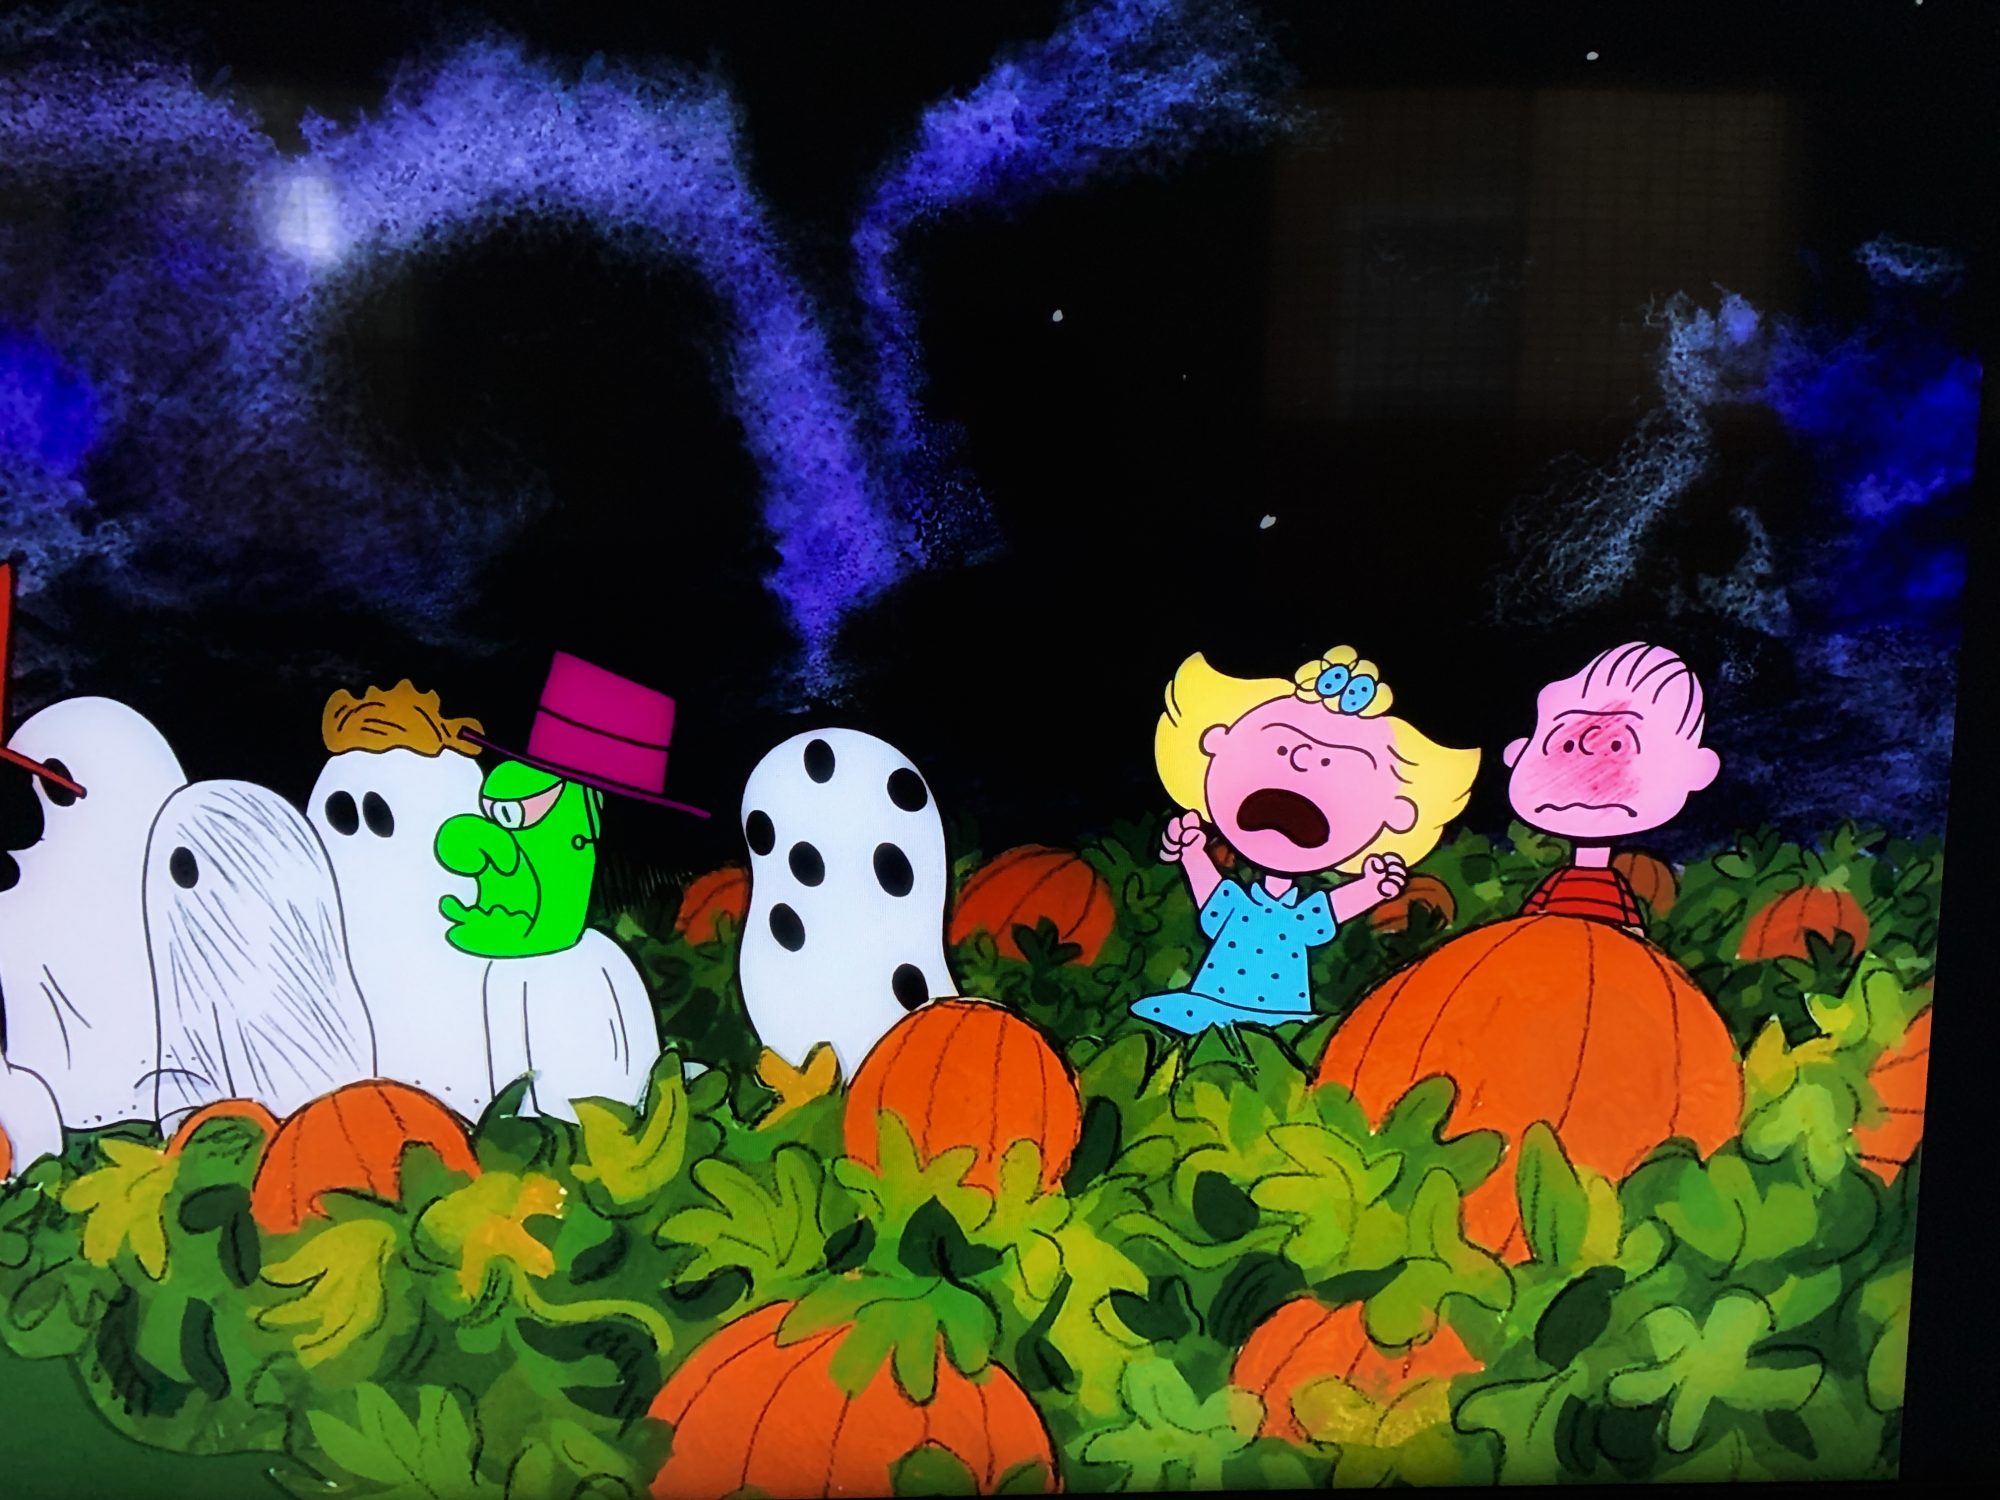 Here's the Only Place to Watch "It's the Great Pumpkin, Charlie Brown